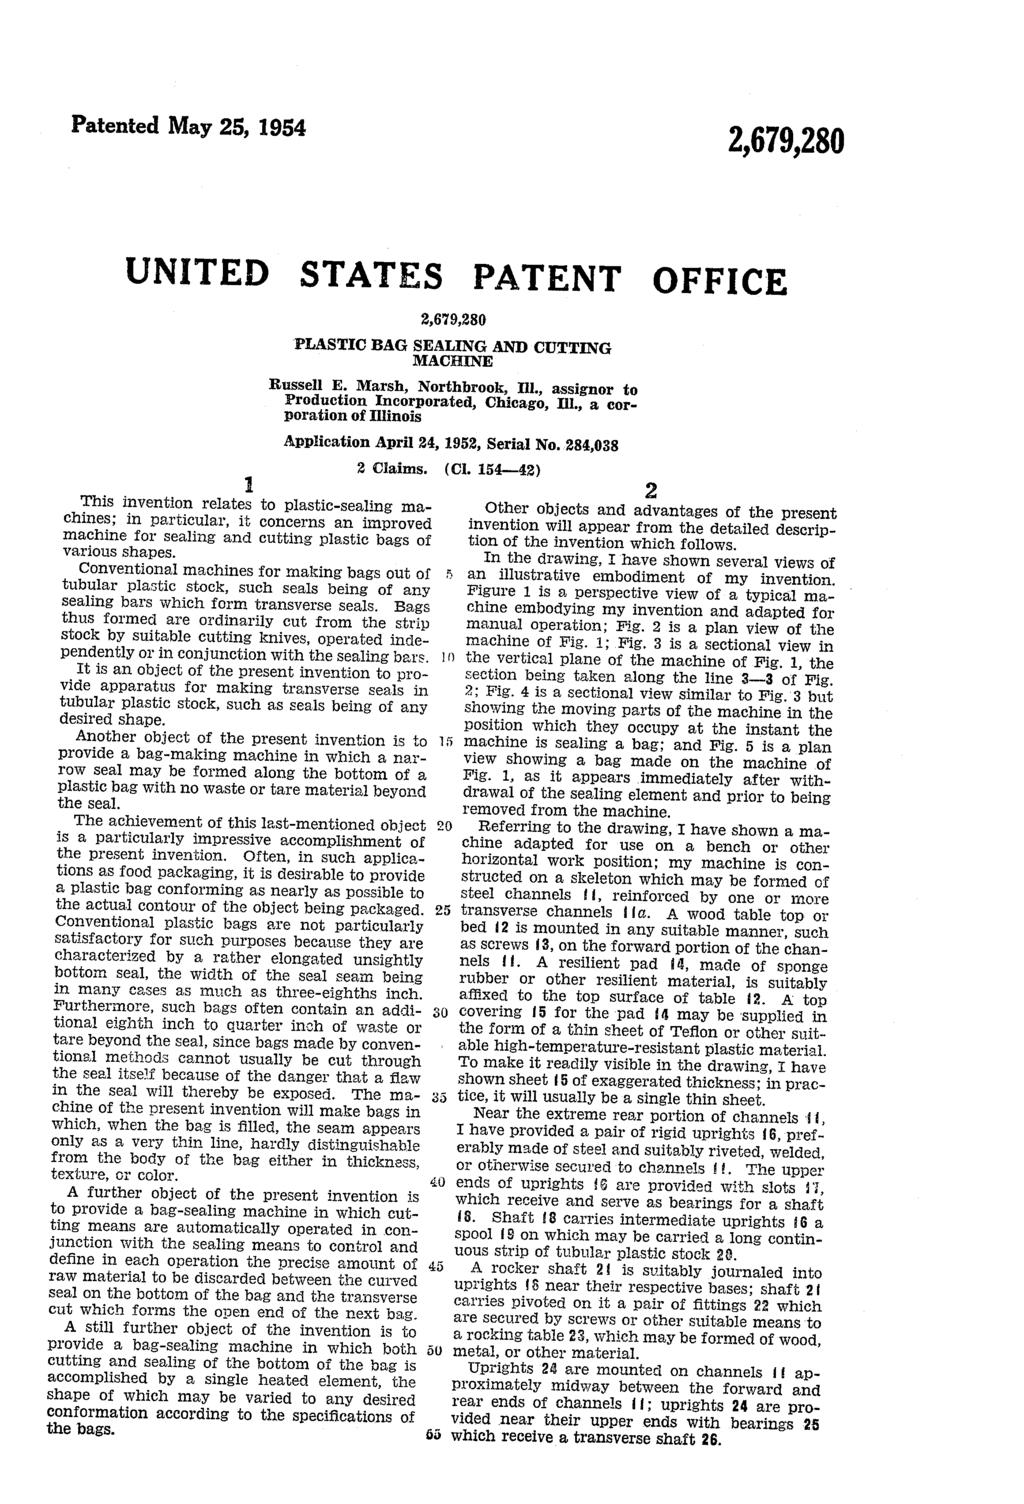 Patented May 25, 1954 UNITED STATES PATENT OFFICE 2 Claims.